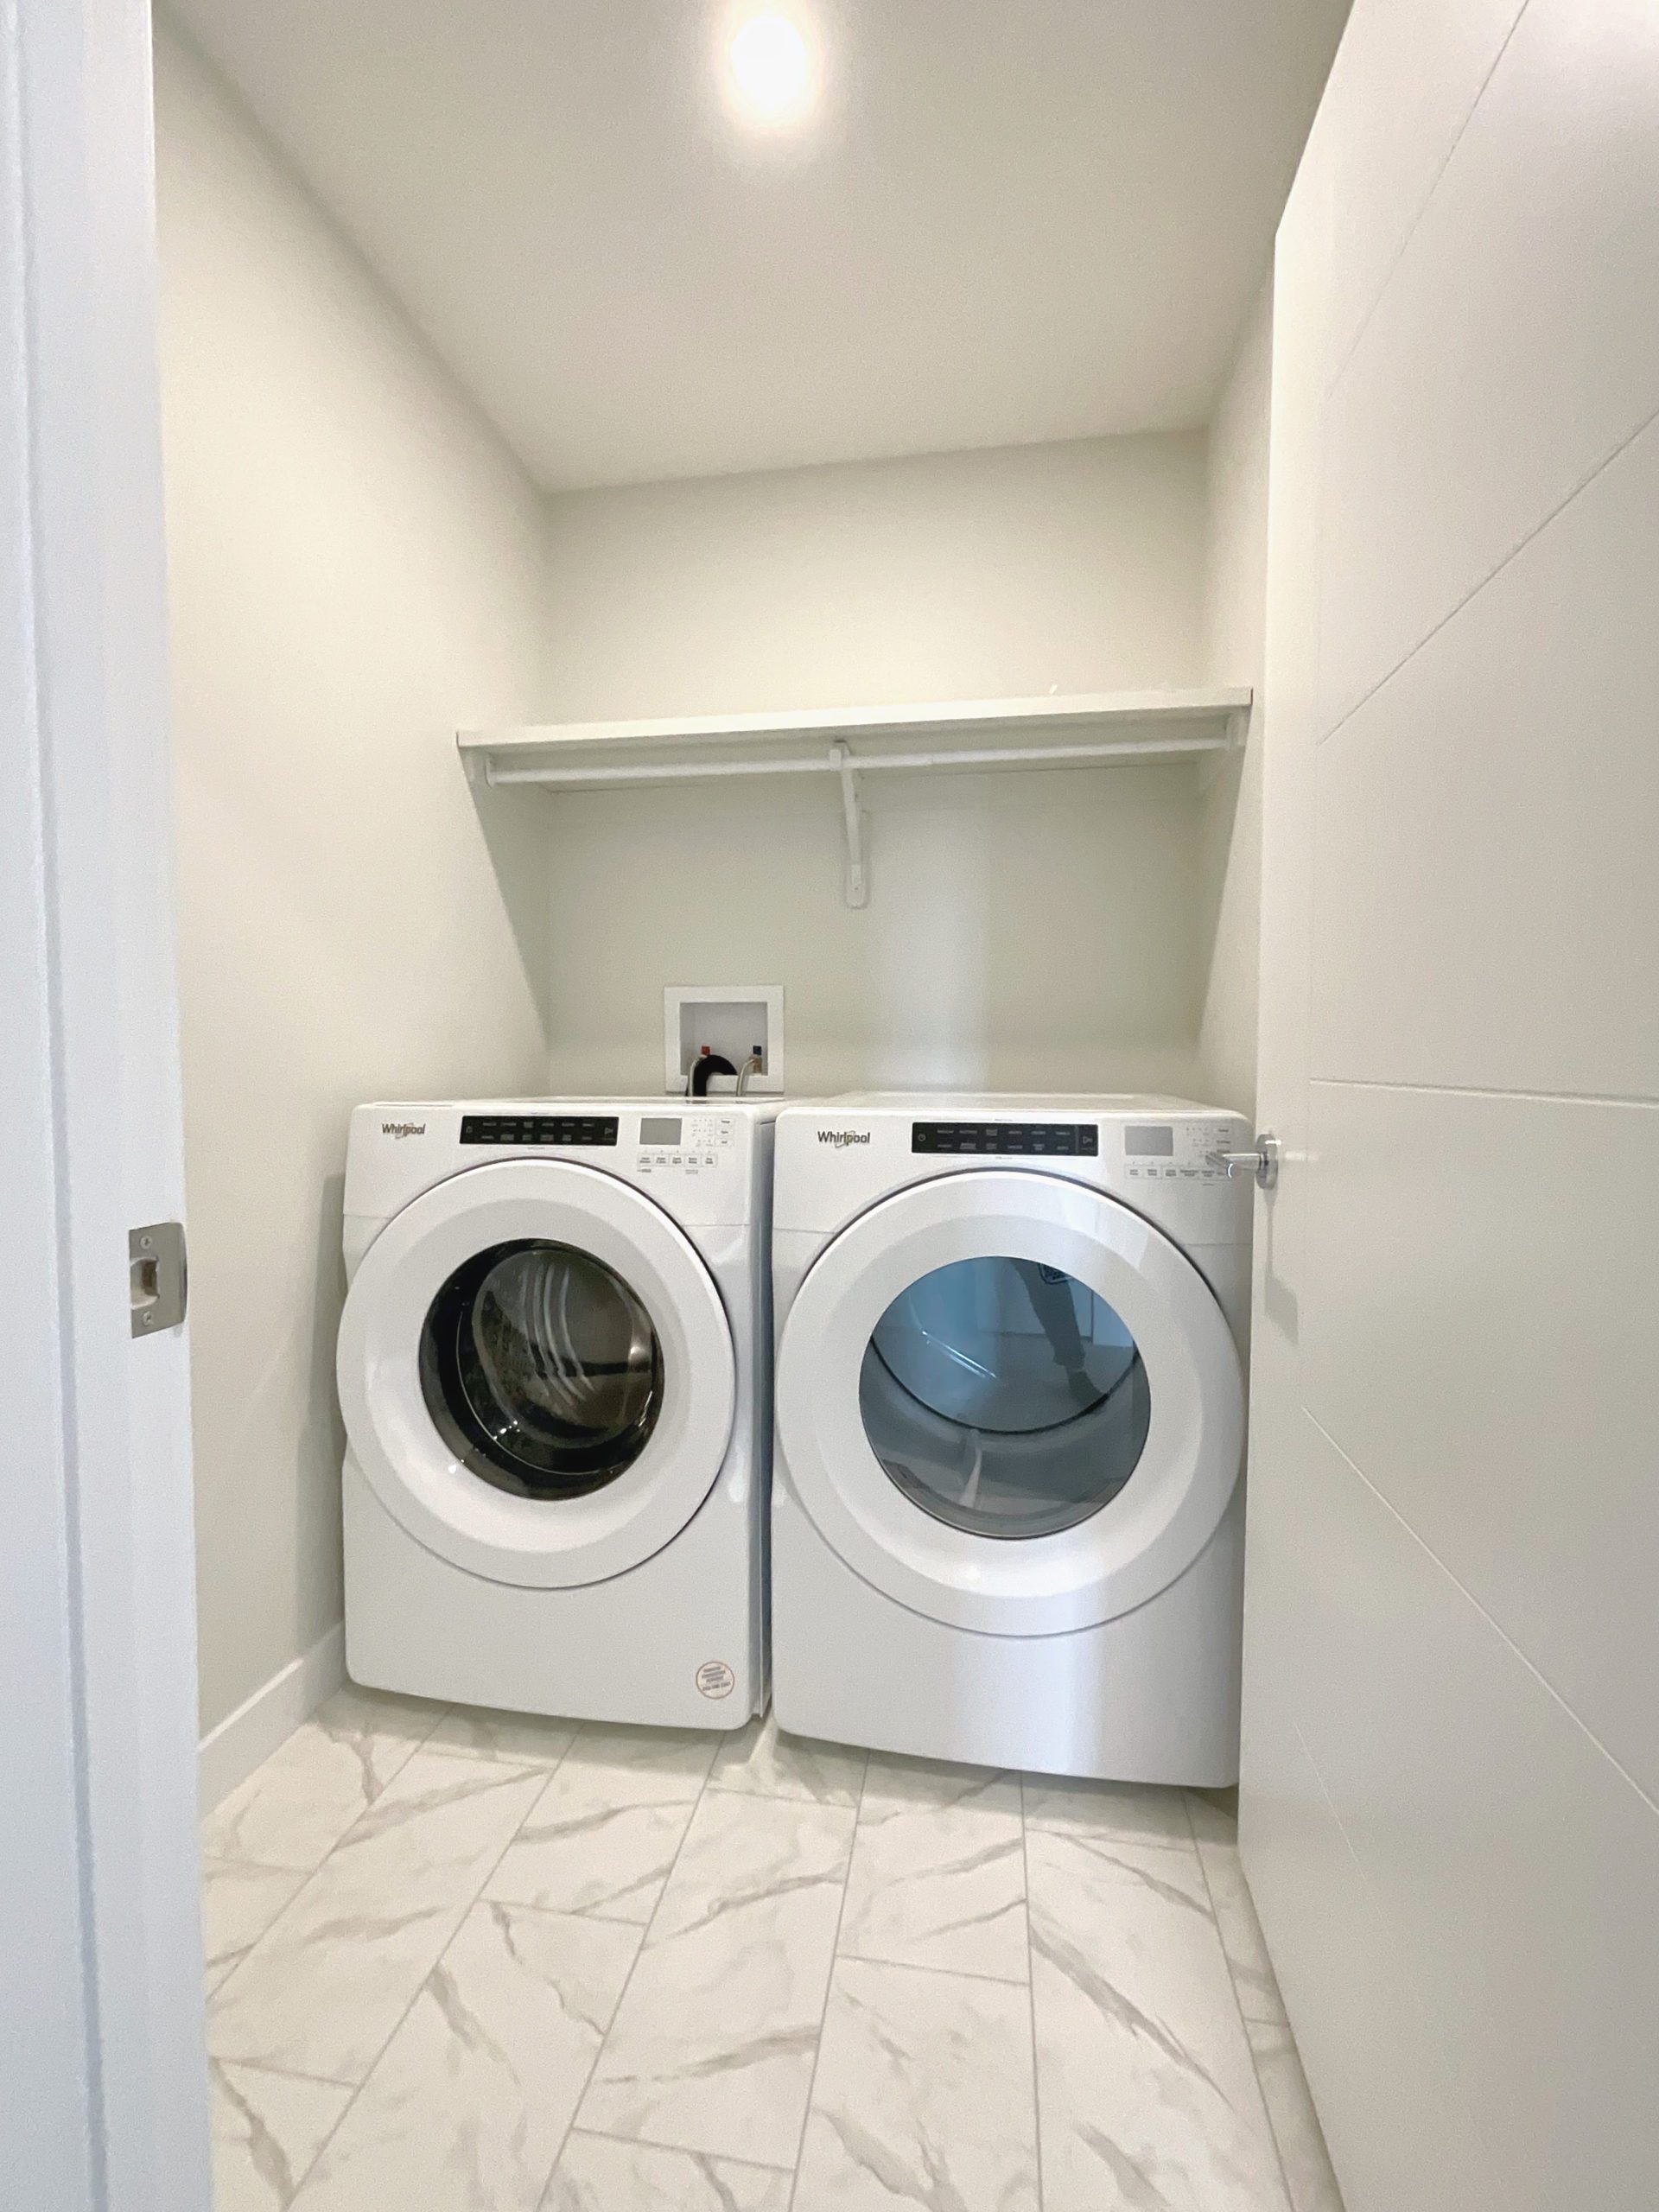 Upstairs laundry room with side-by-side front load washer and dryer.